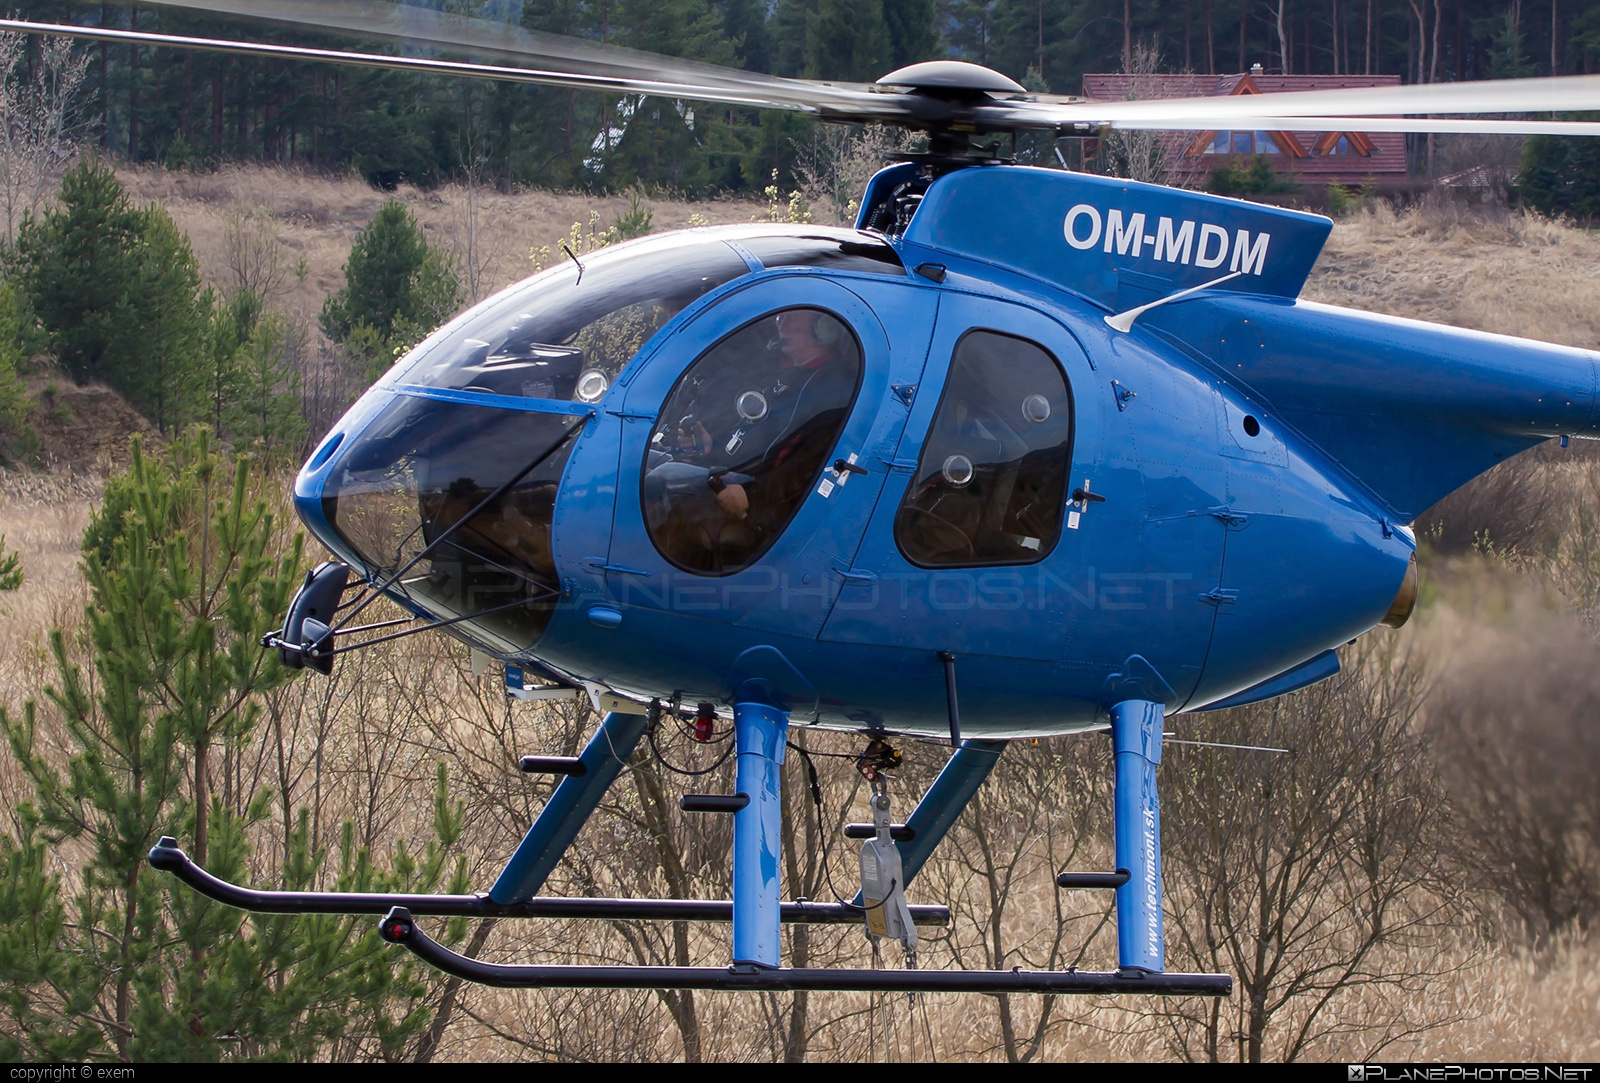 MD Helicopters MD-530F - OM-MDM operated by TECH-MONT Helicopter company #md530f #mdhelicopters #mdhelicopters500 #mdhelicoptersmd530f